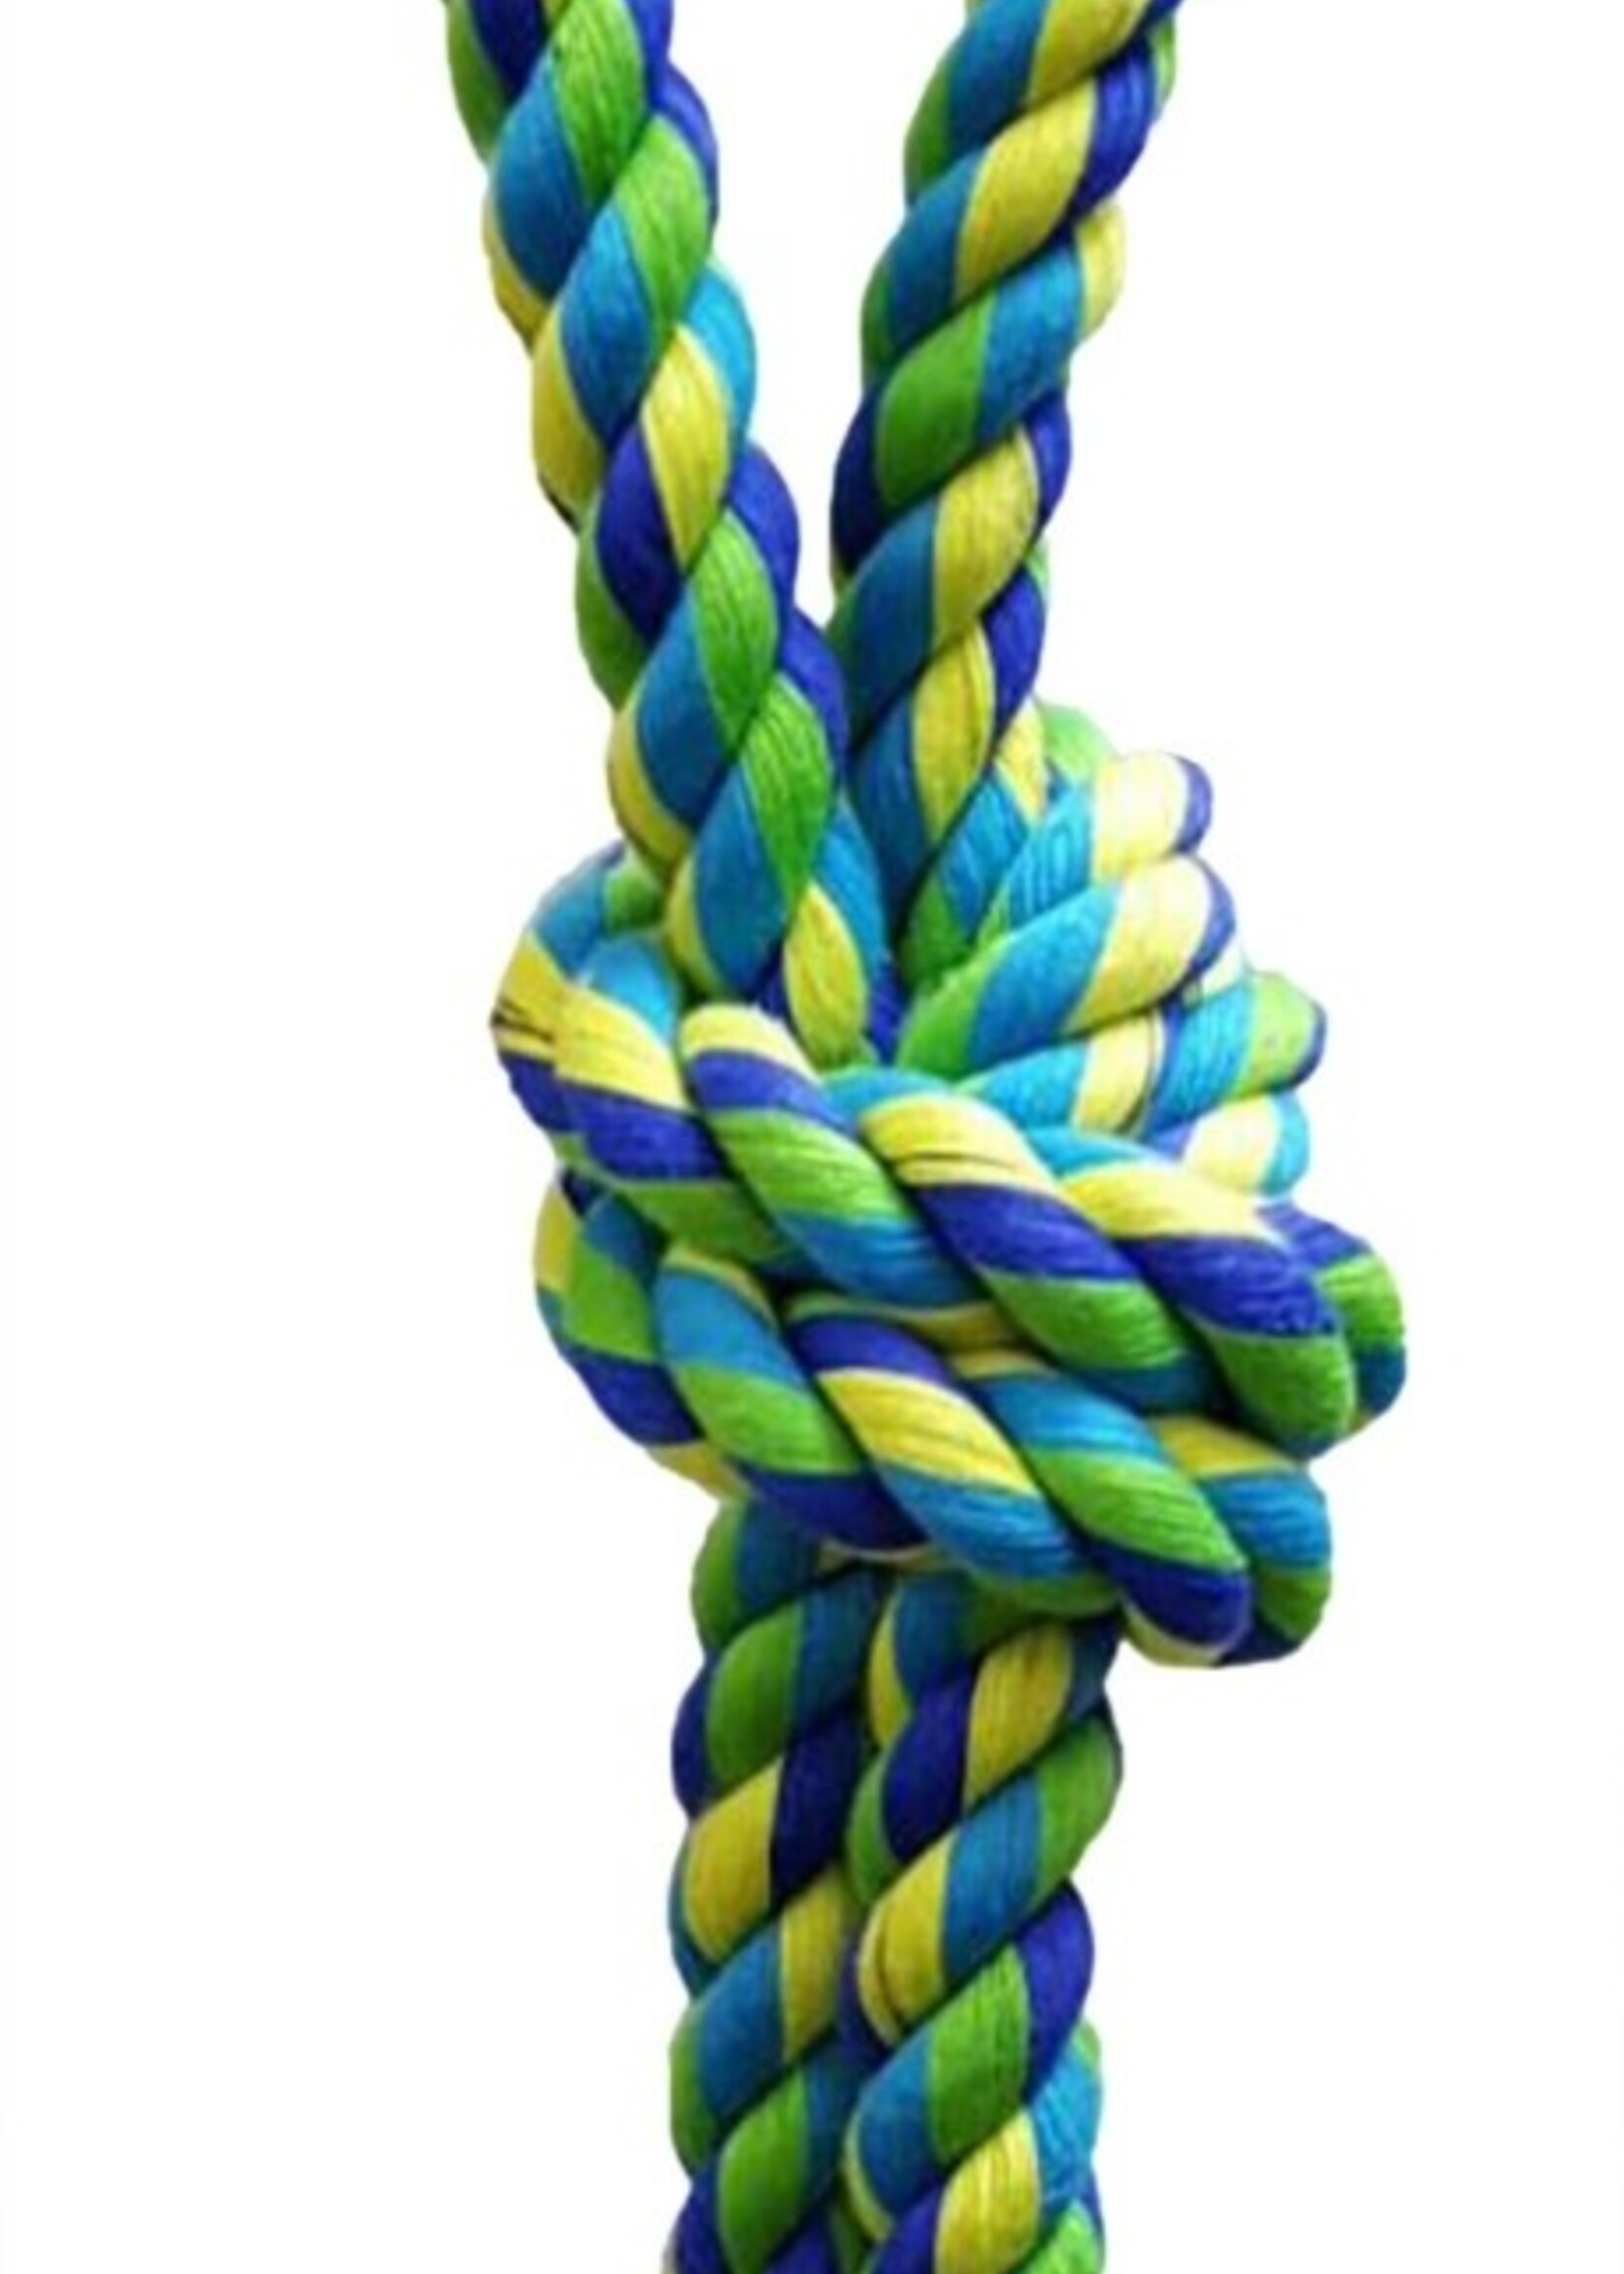 Pet Qwerks Pet Qwerks Jingle X-Tire Ball with Knotted Rope Tug 'n Toss Dog Toy